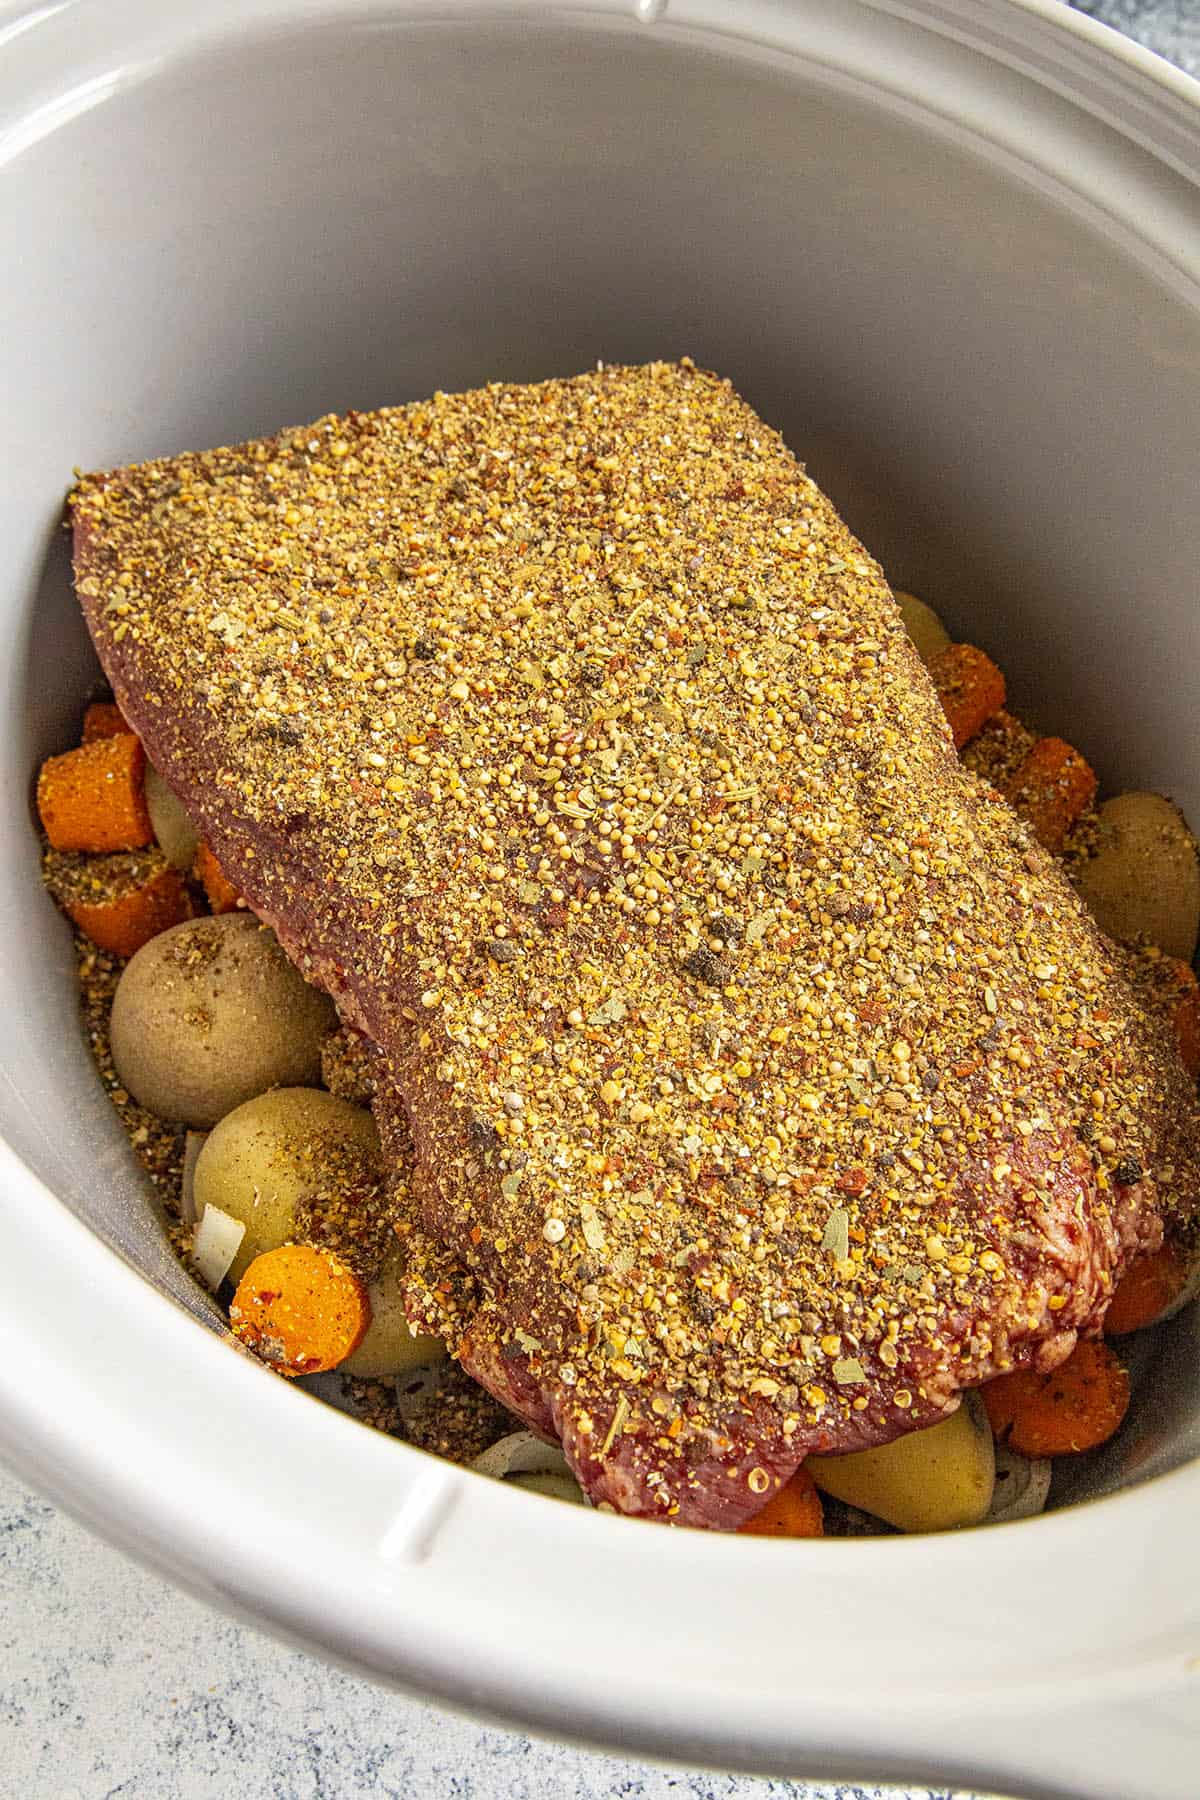 Highly seasoned corned beef in a crock pot, ready for slow cooking